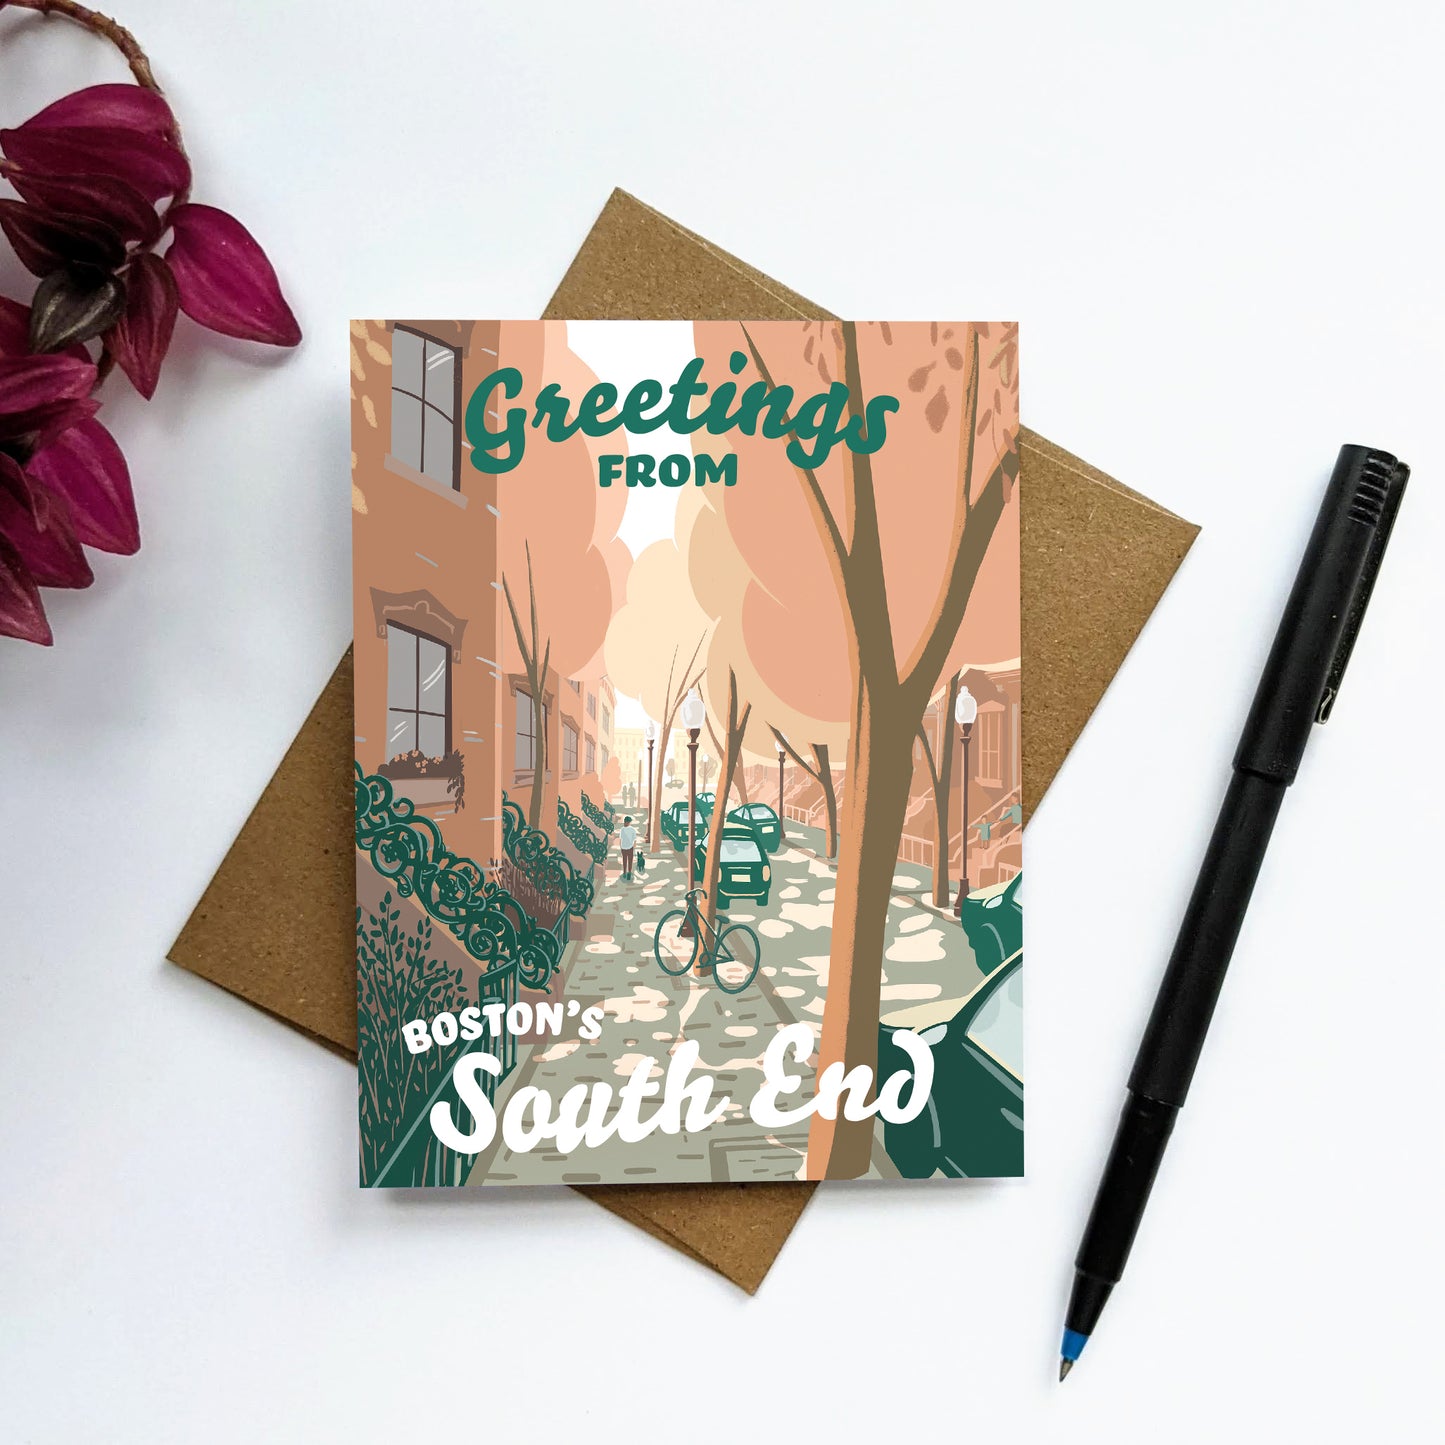 "Greetings from Boston's South End" Greeting Card